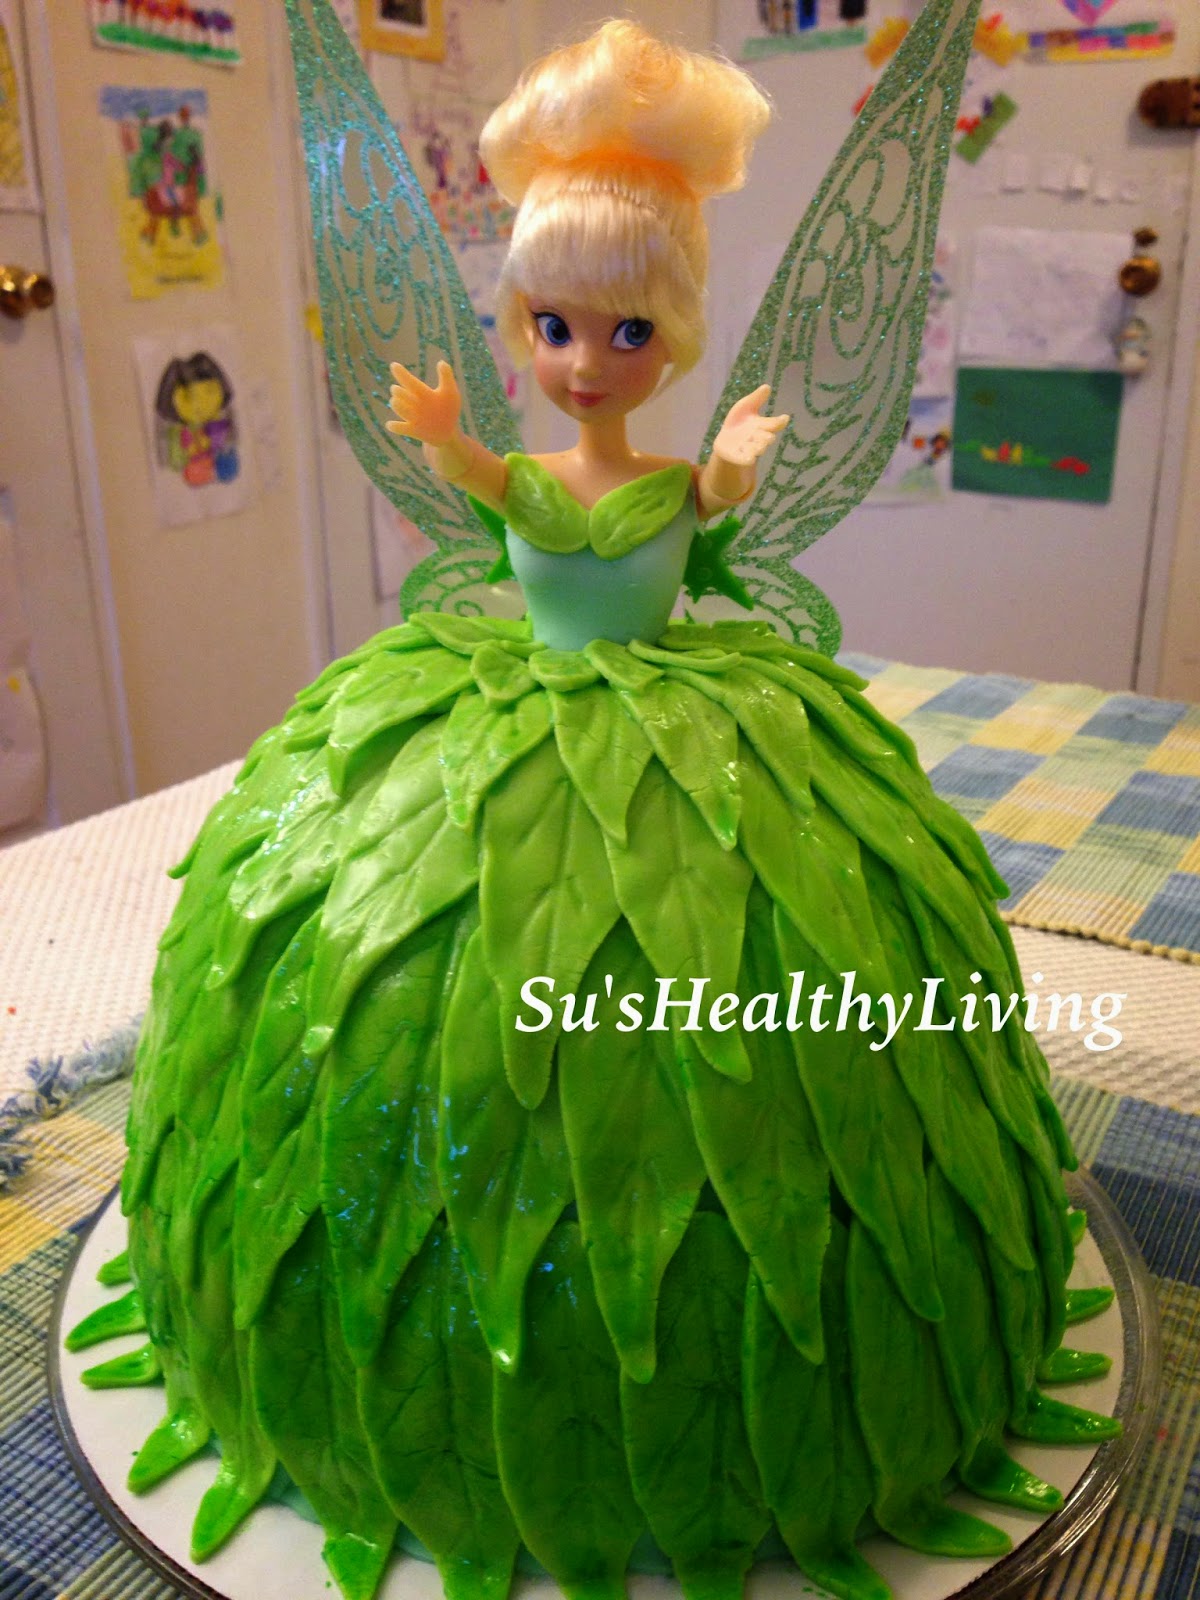 Su's Healthy Living: Tinker Bell Doll Cake